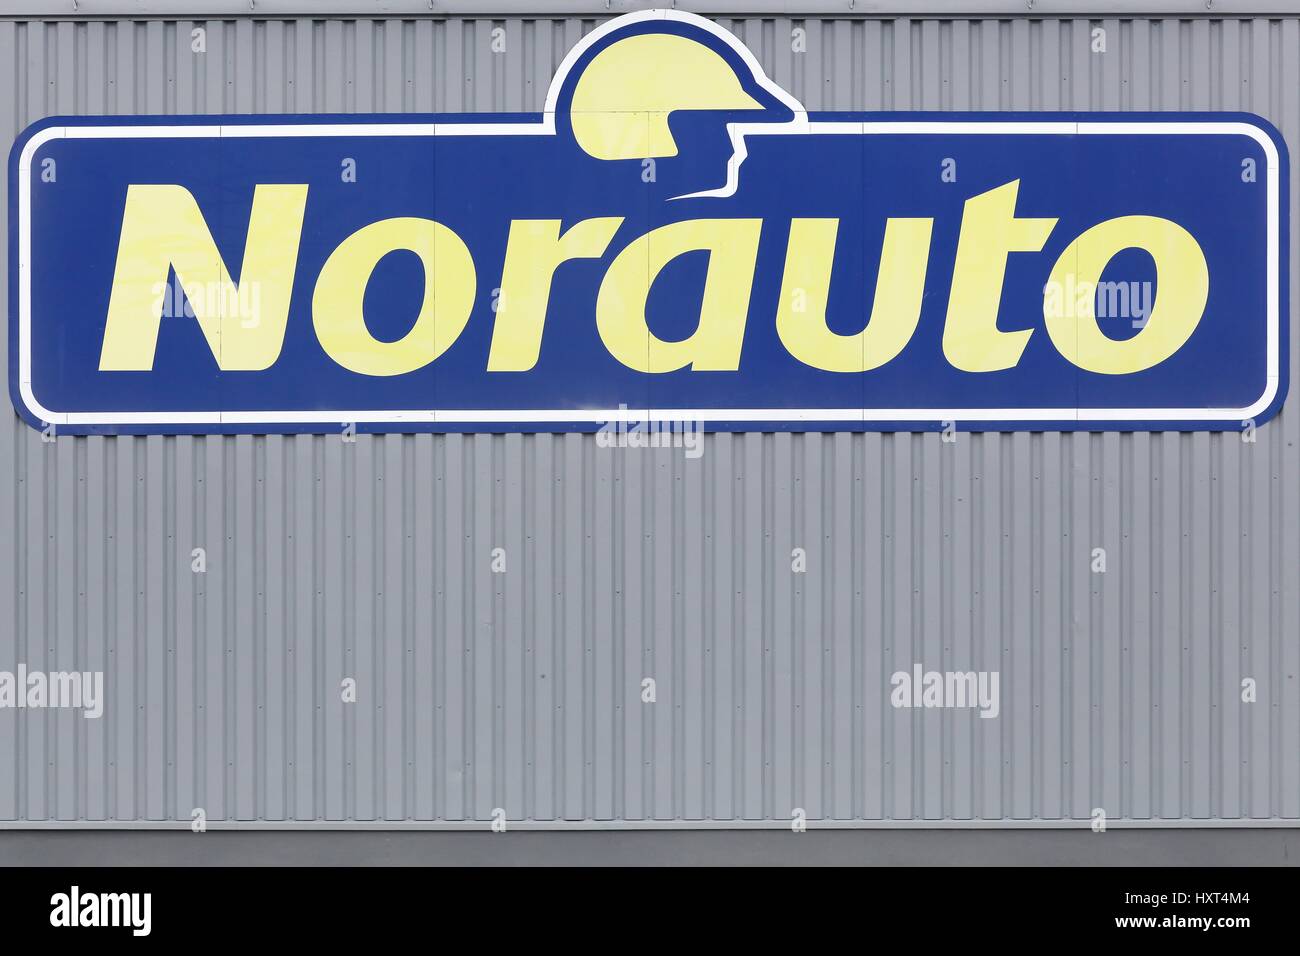 Orleans, France - March 19, 2017: Norauto logo on a wall. Norauto is a French based company which focuses on car repairs and car accessories Stock Photo